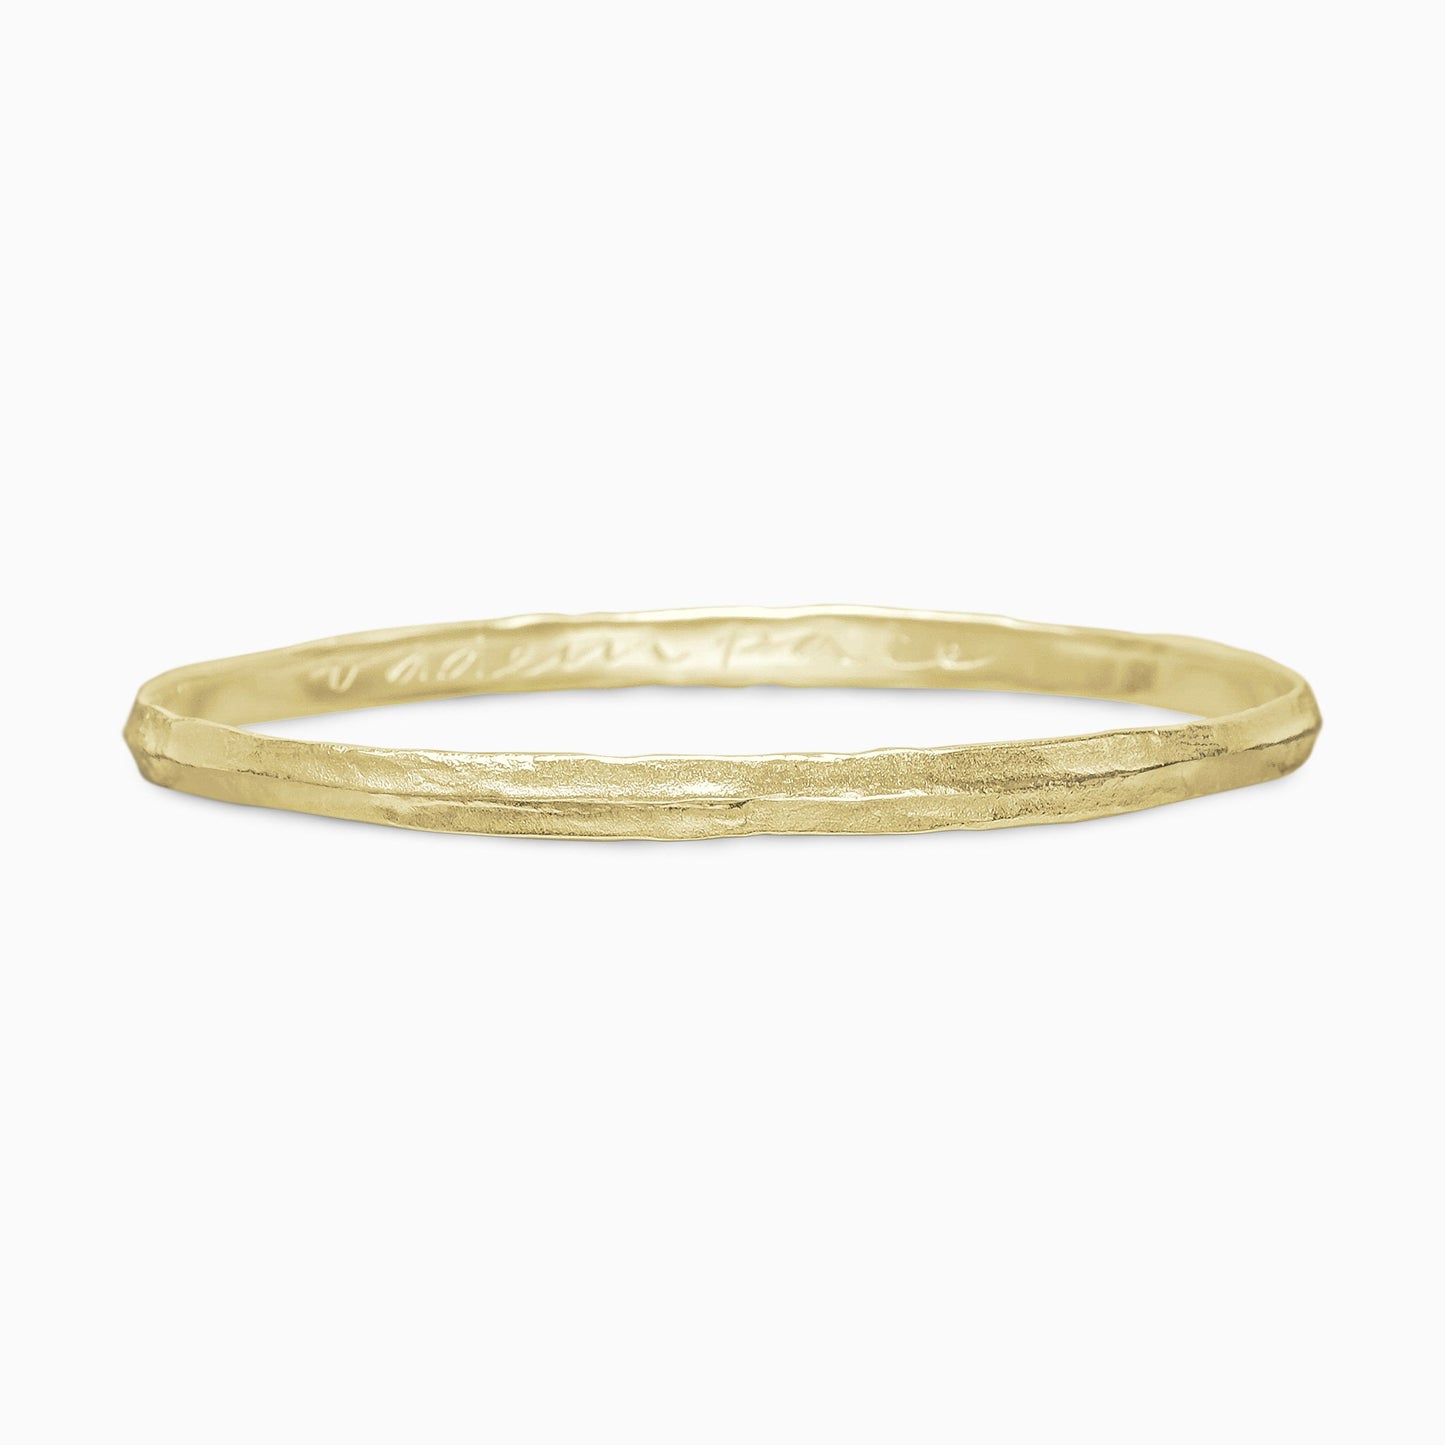 An 18ct Fairtrade yellow gold bangle rising to a central ridge, engraved inside ‘VAde in Pace’ which is ‘Go in Peace’ in Latin. Width 5mm. Inside diameter 63mm.